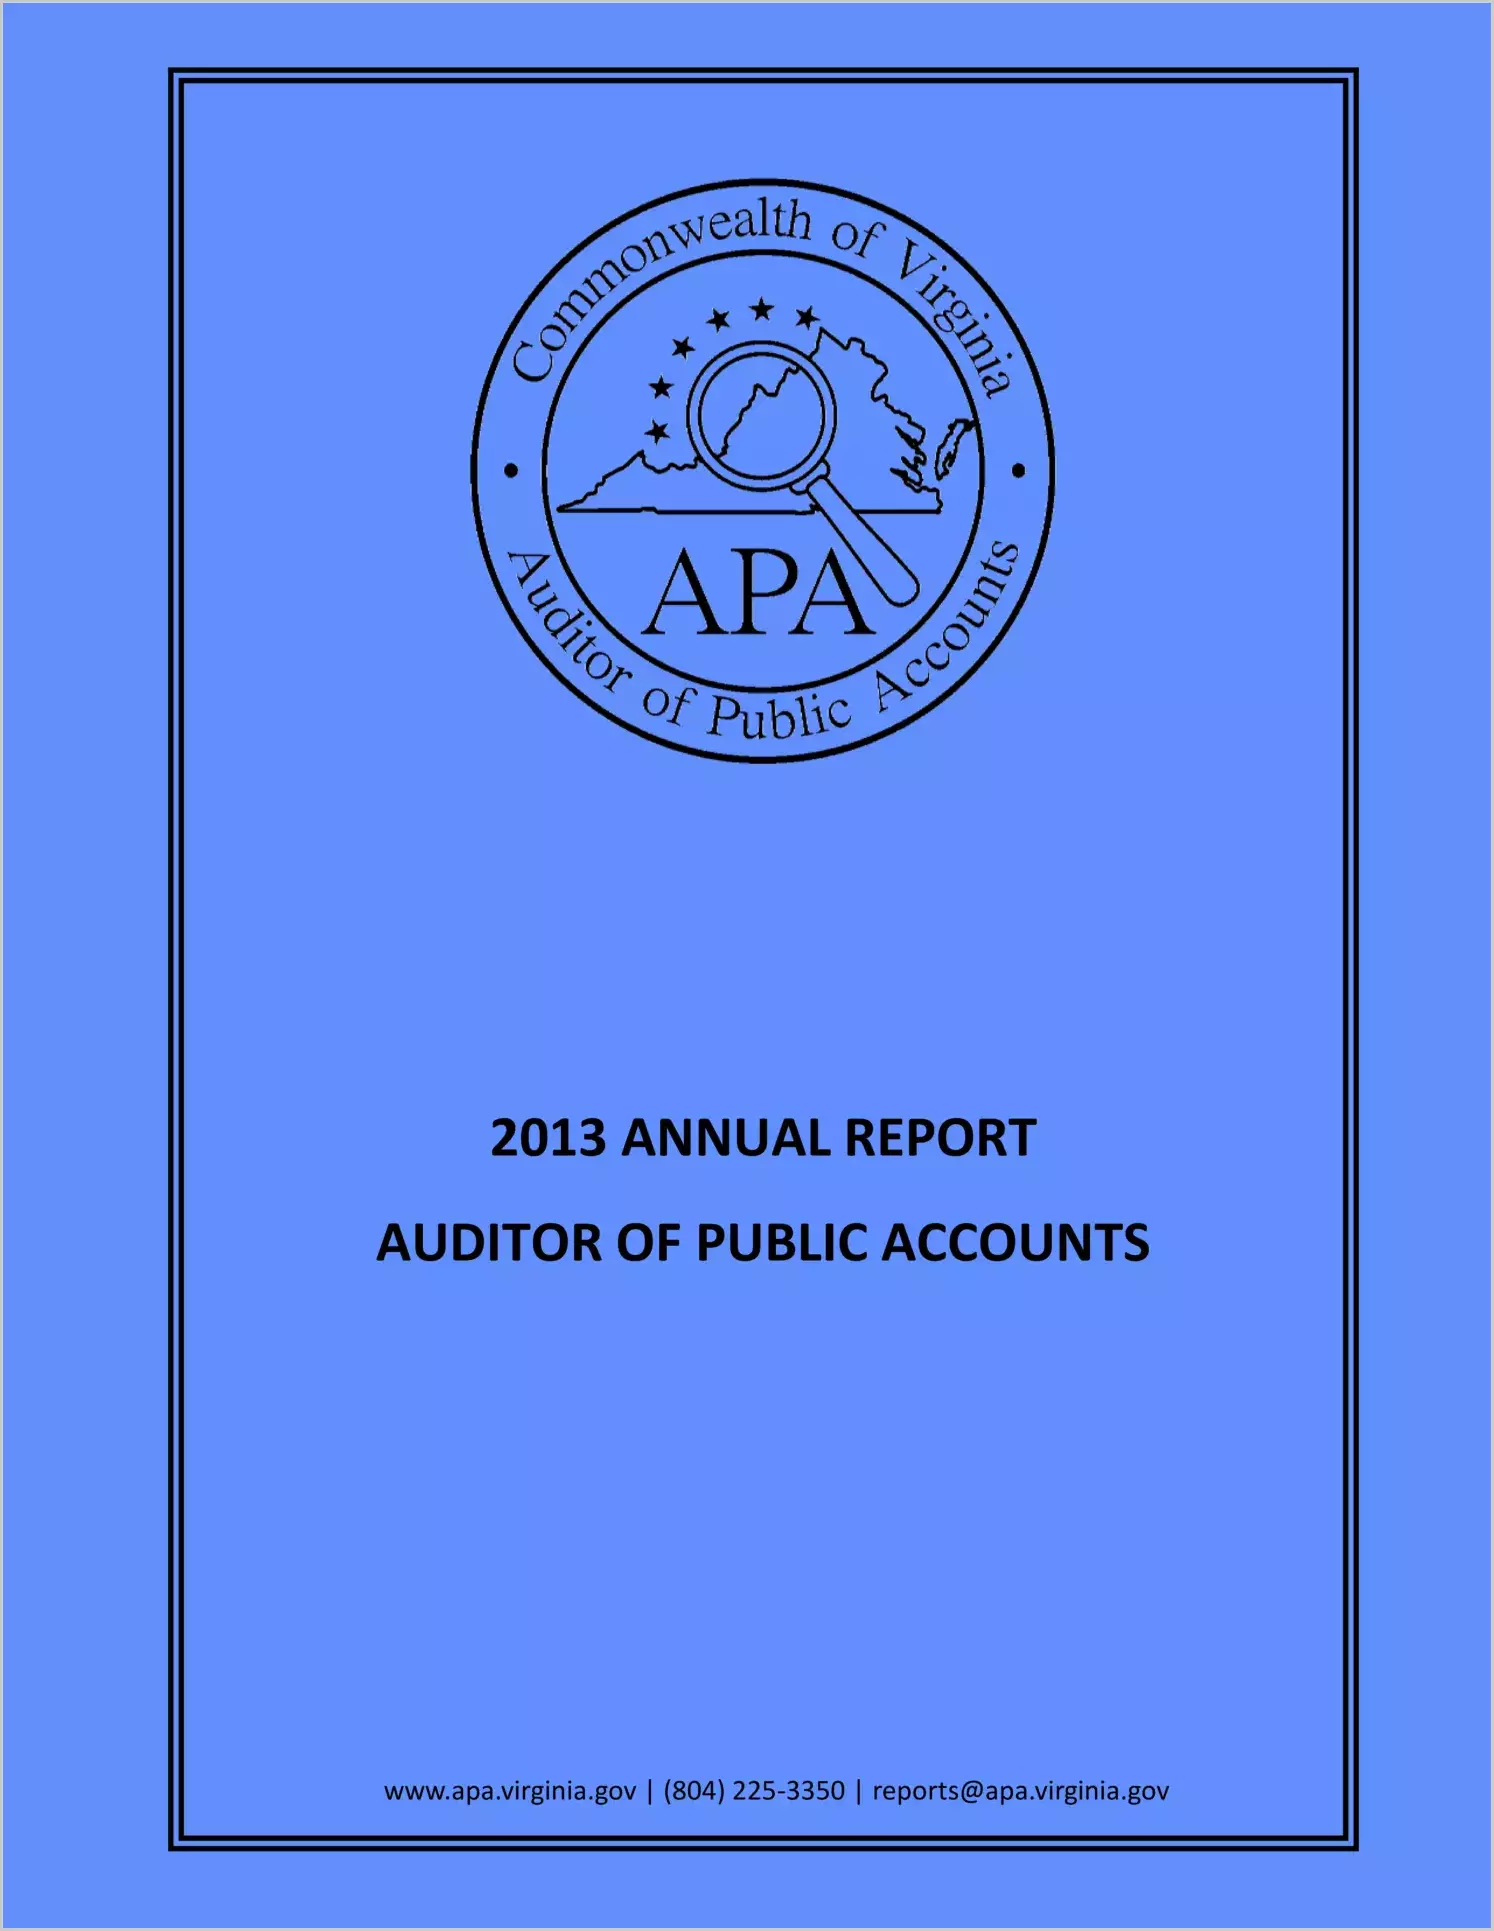 2013 Annual Report Auditor of Public Accounts